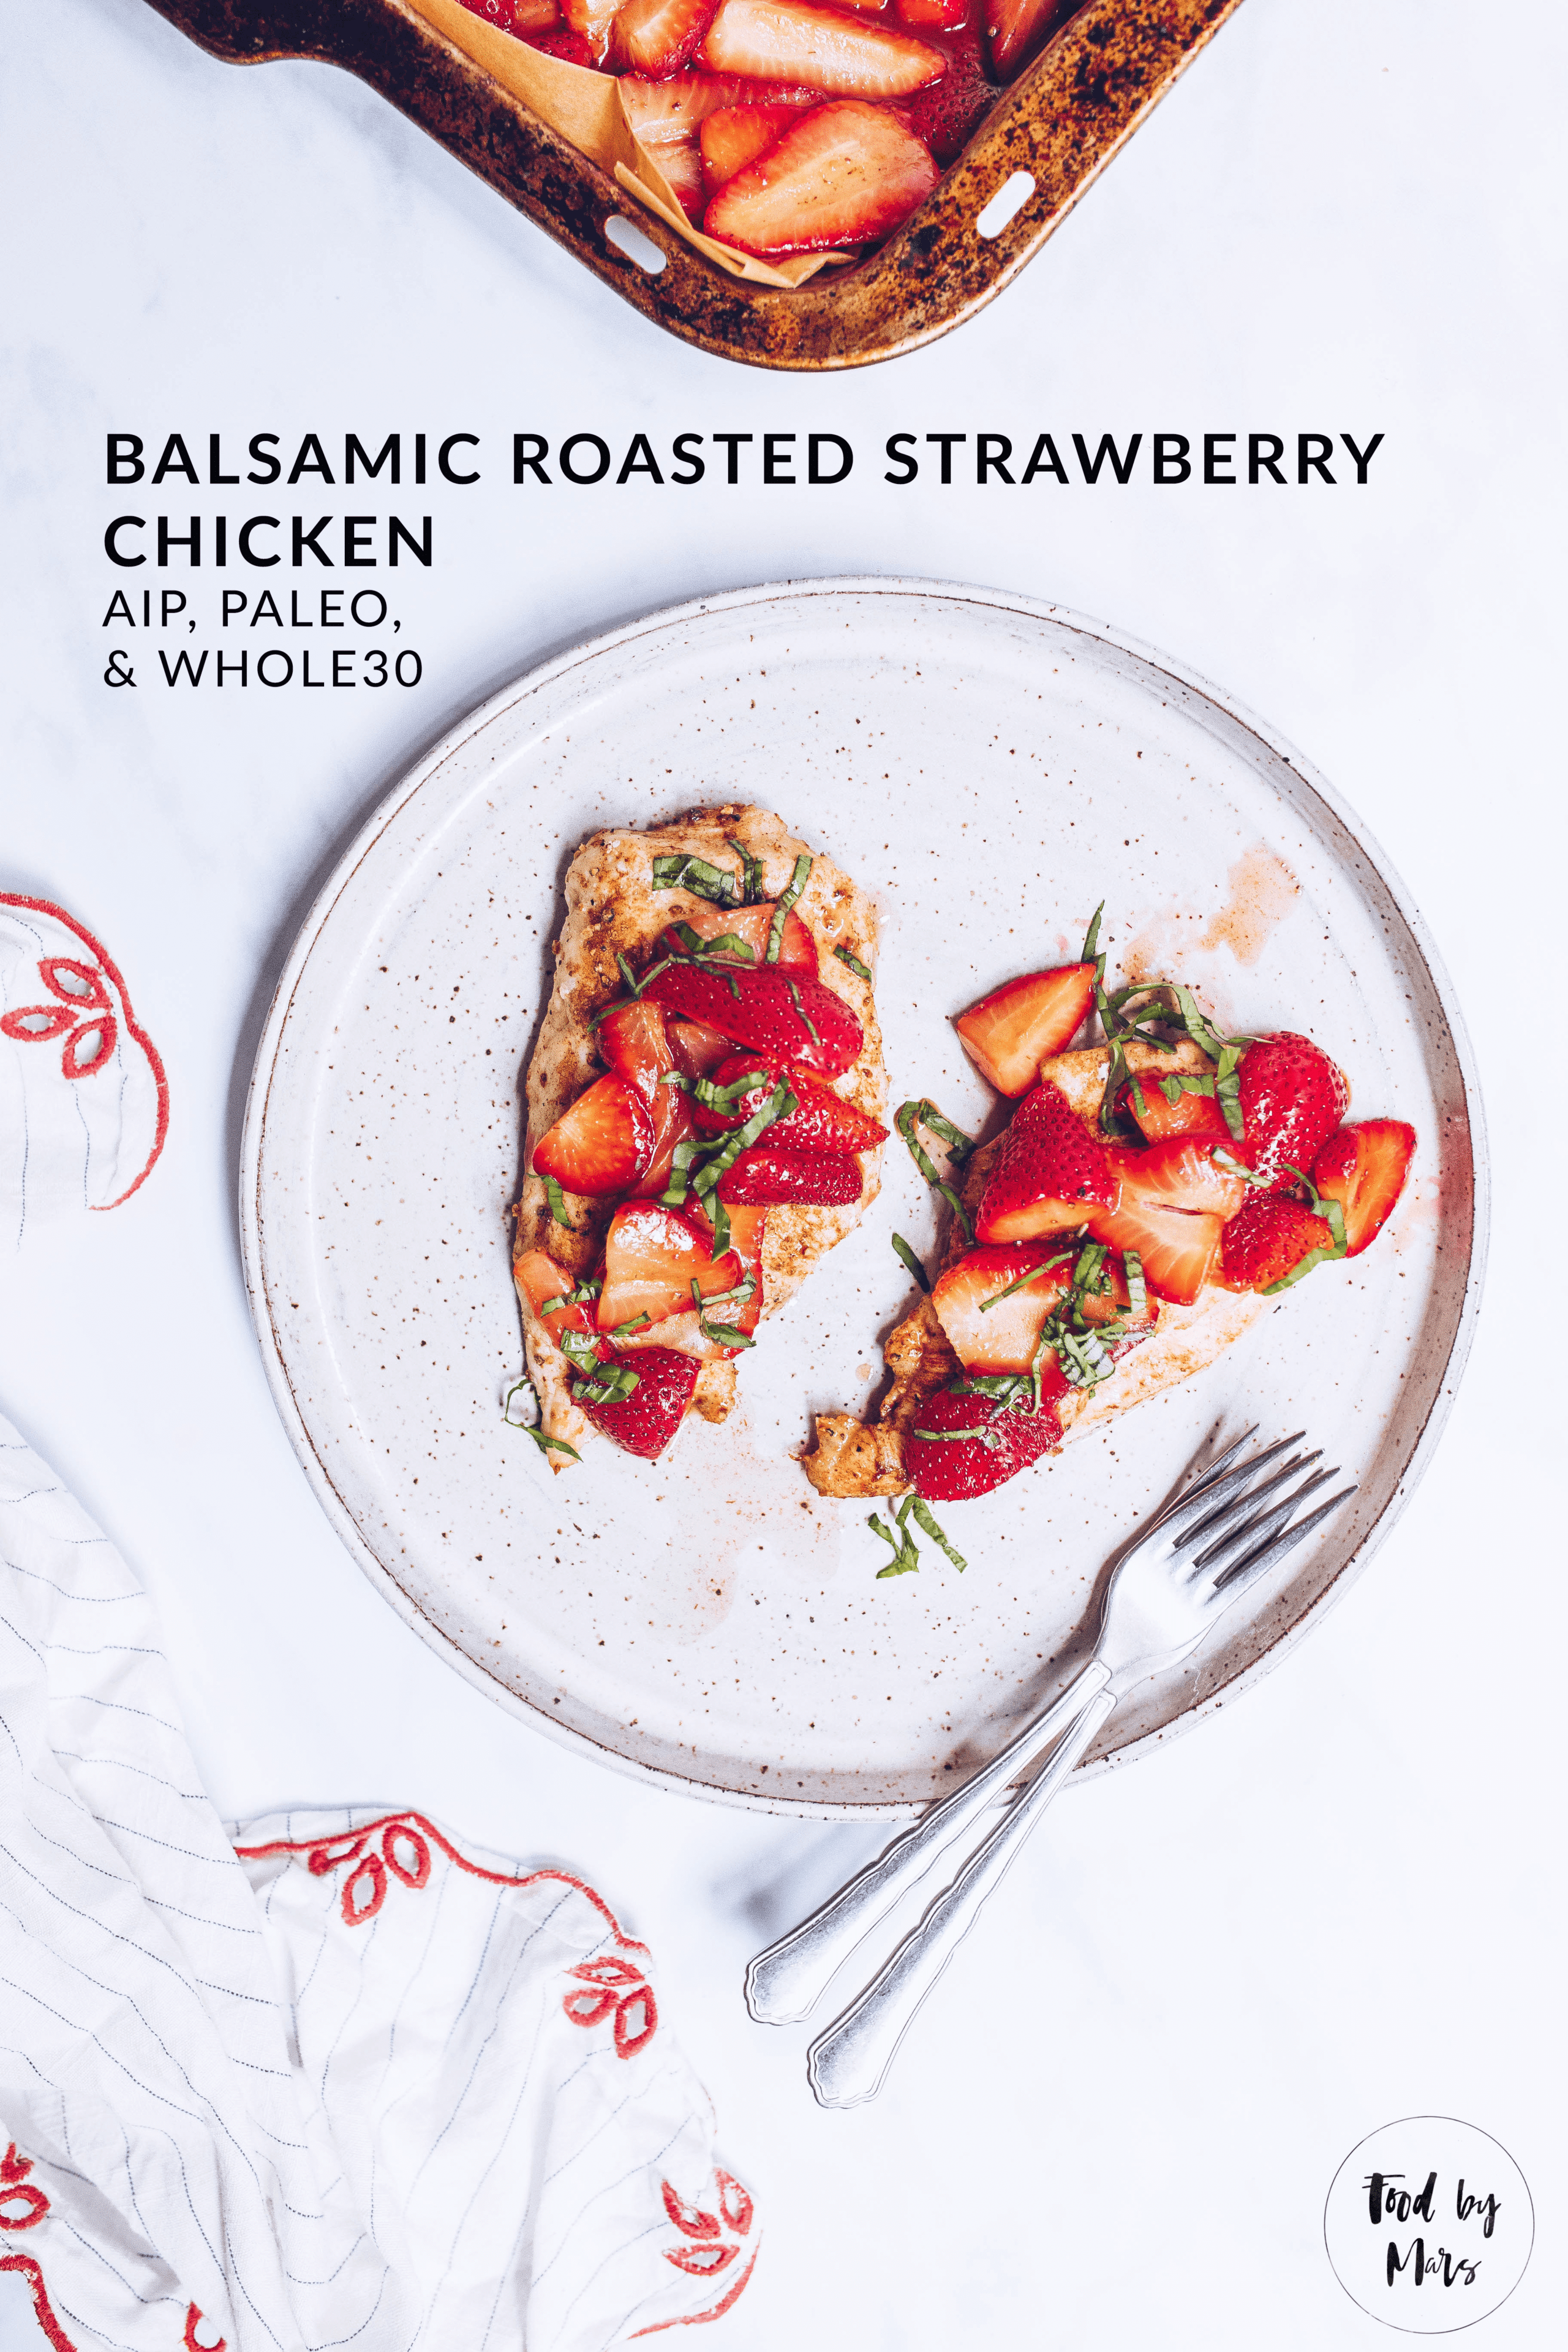 Balsamic Roasted Strawberry Chicken (AIP, Paleo, Whole30)